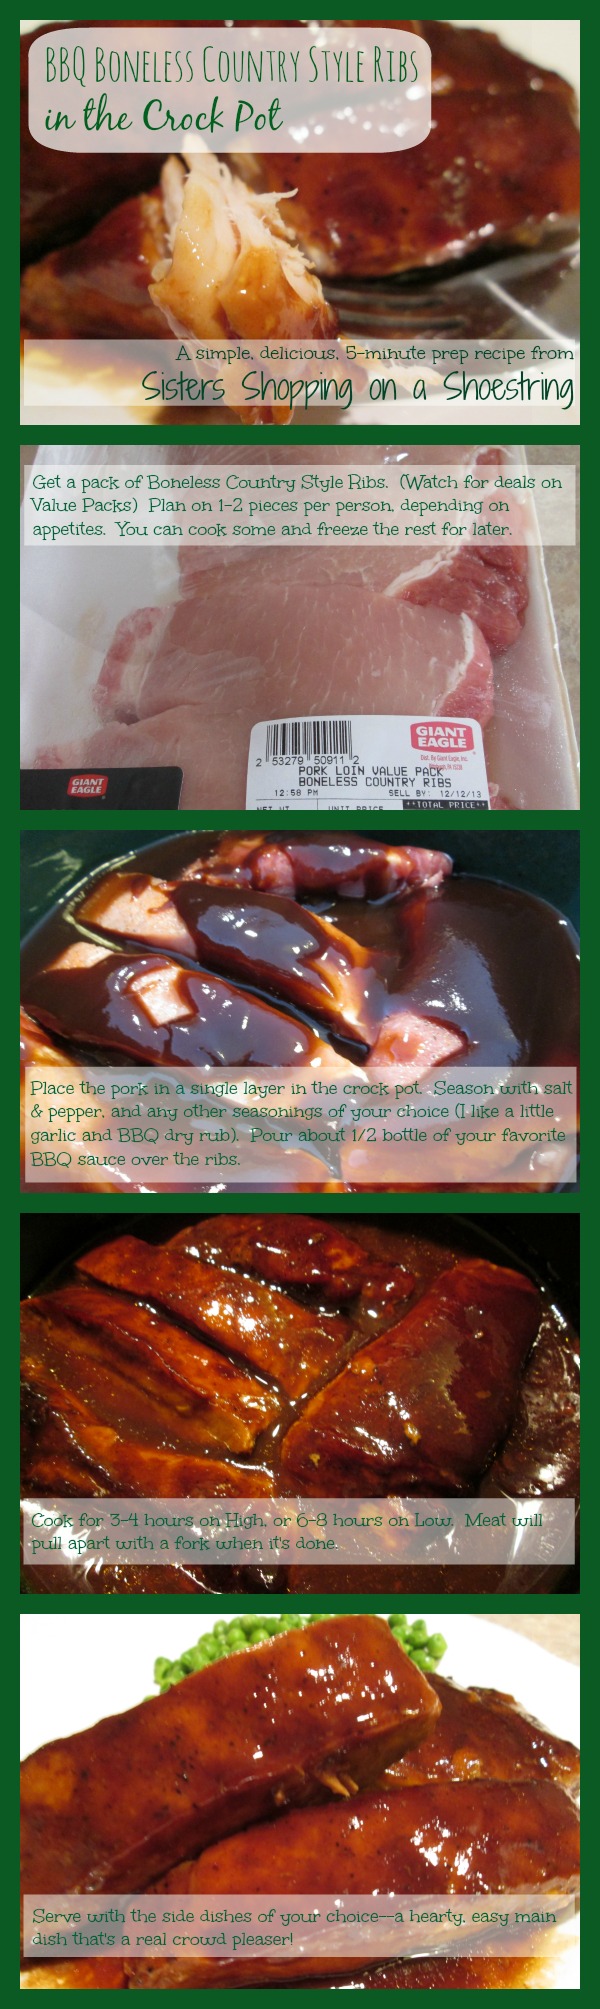 Crock Pot BBQ Country Style Ribs Recipe--5 minute prep for a delicious meal from Sisters Shopping on a Shoestring